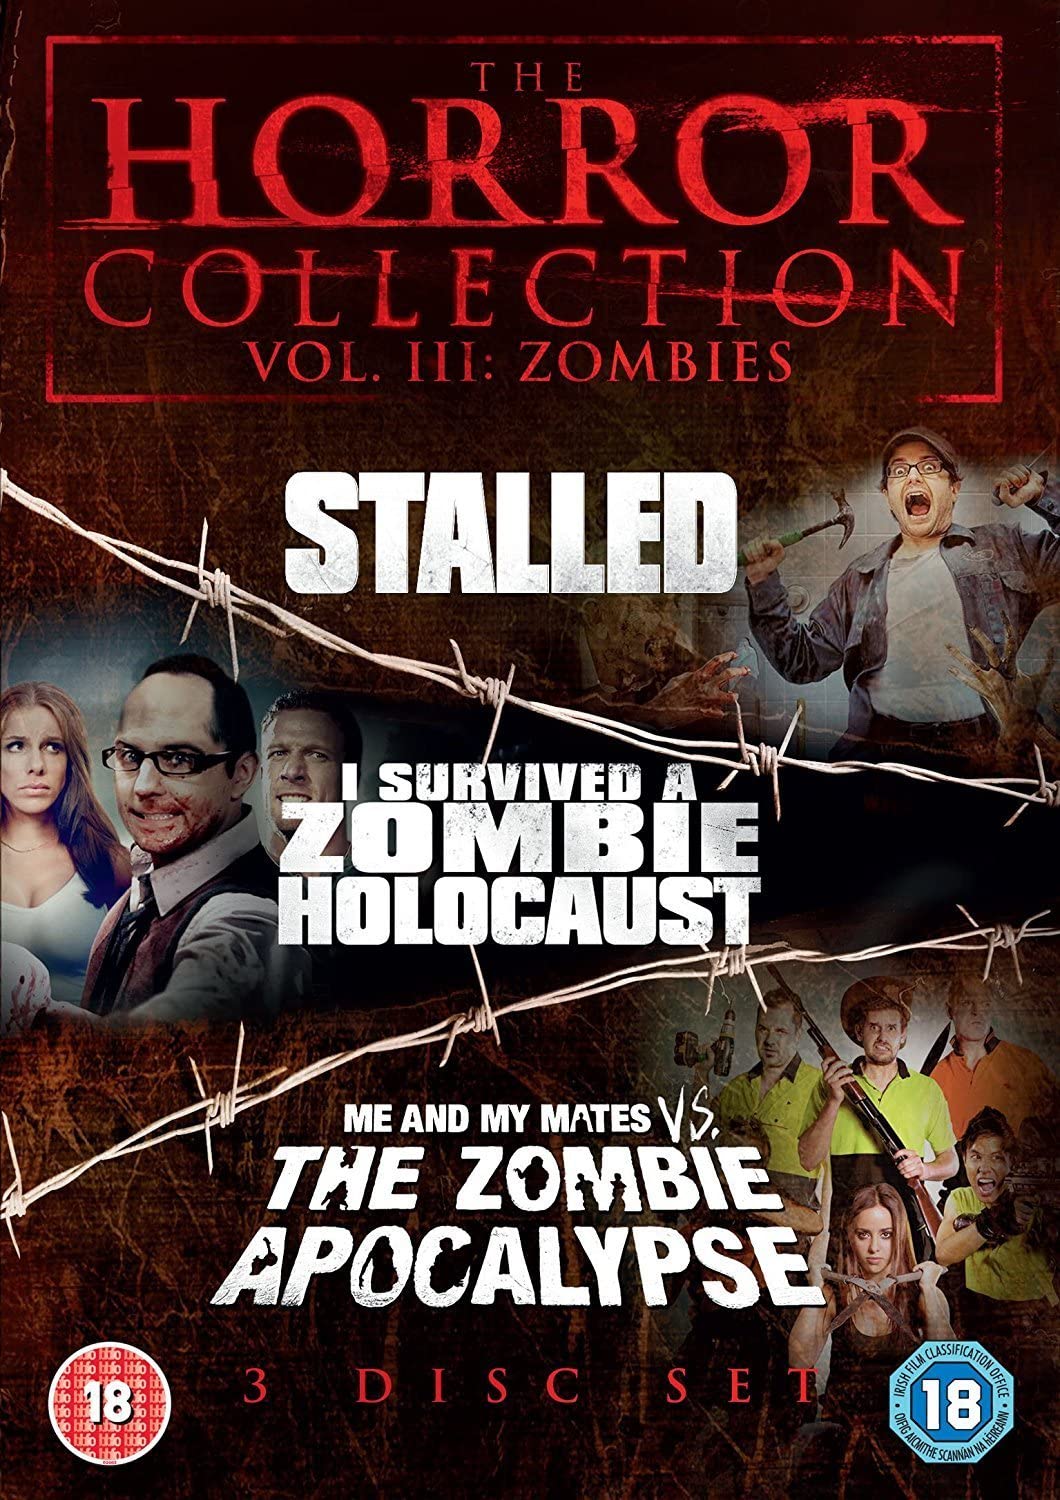 The Horror Collection Vol III: Zombies - [DVD]